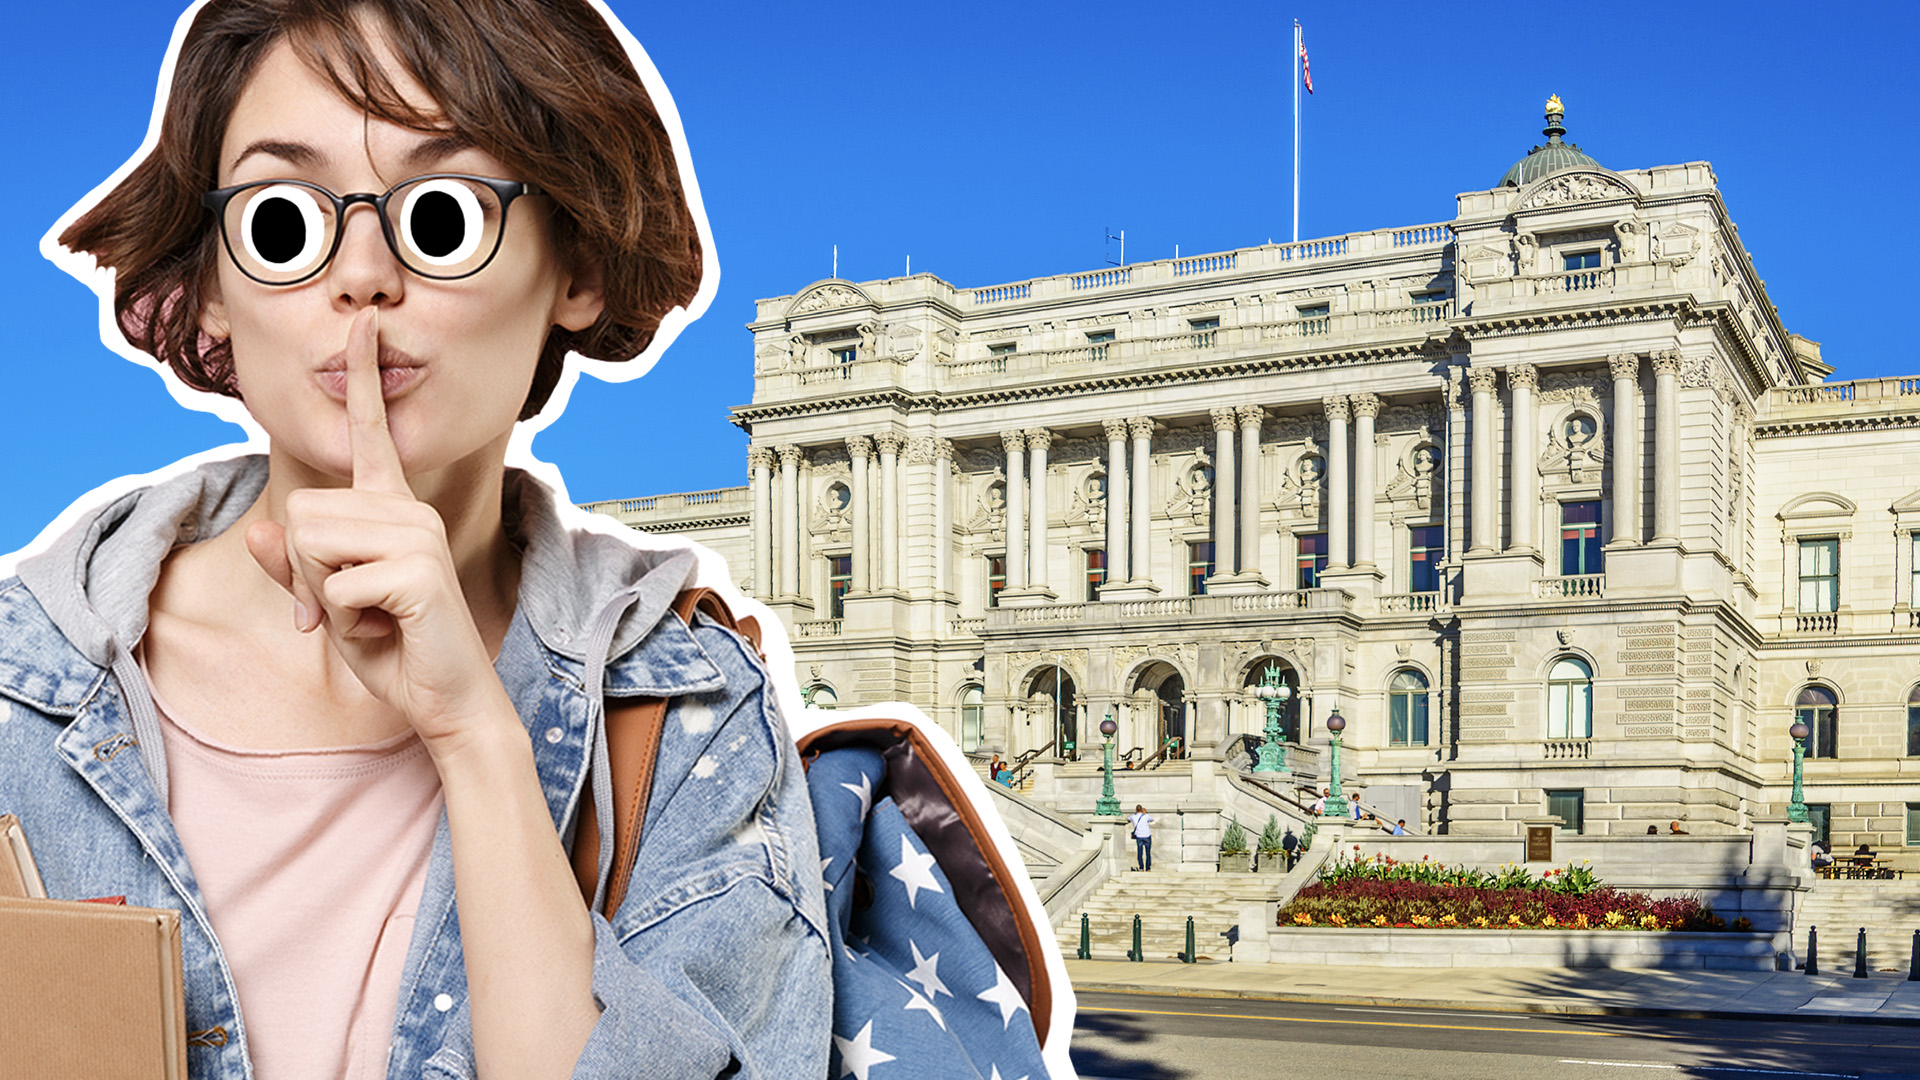 The Library of Congress in the USA